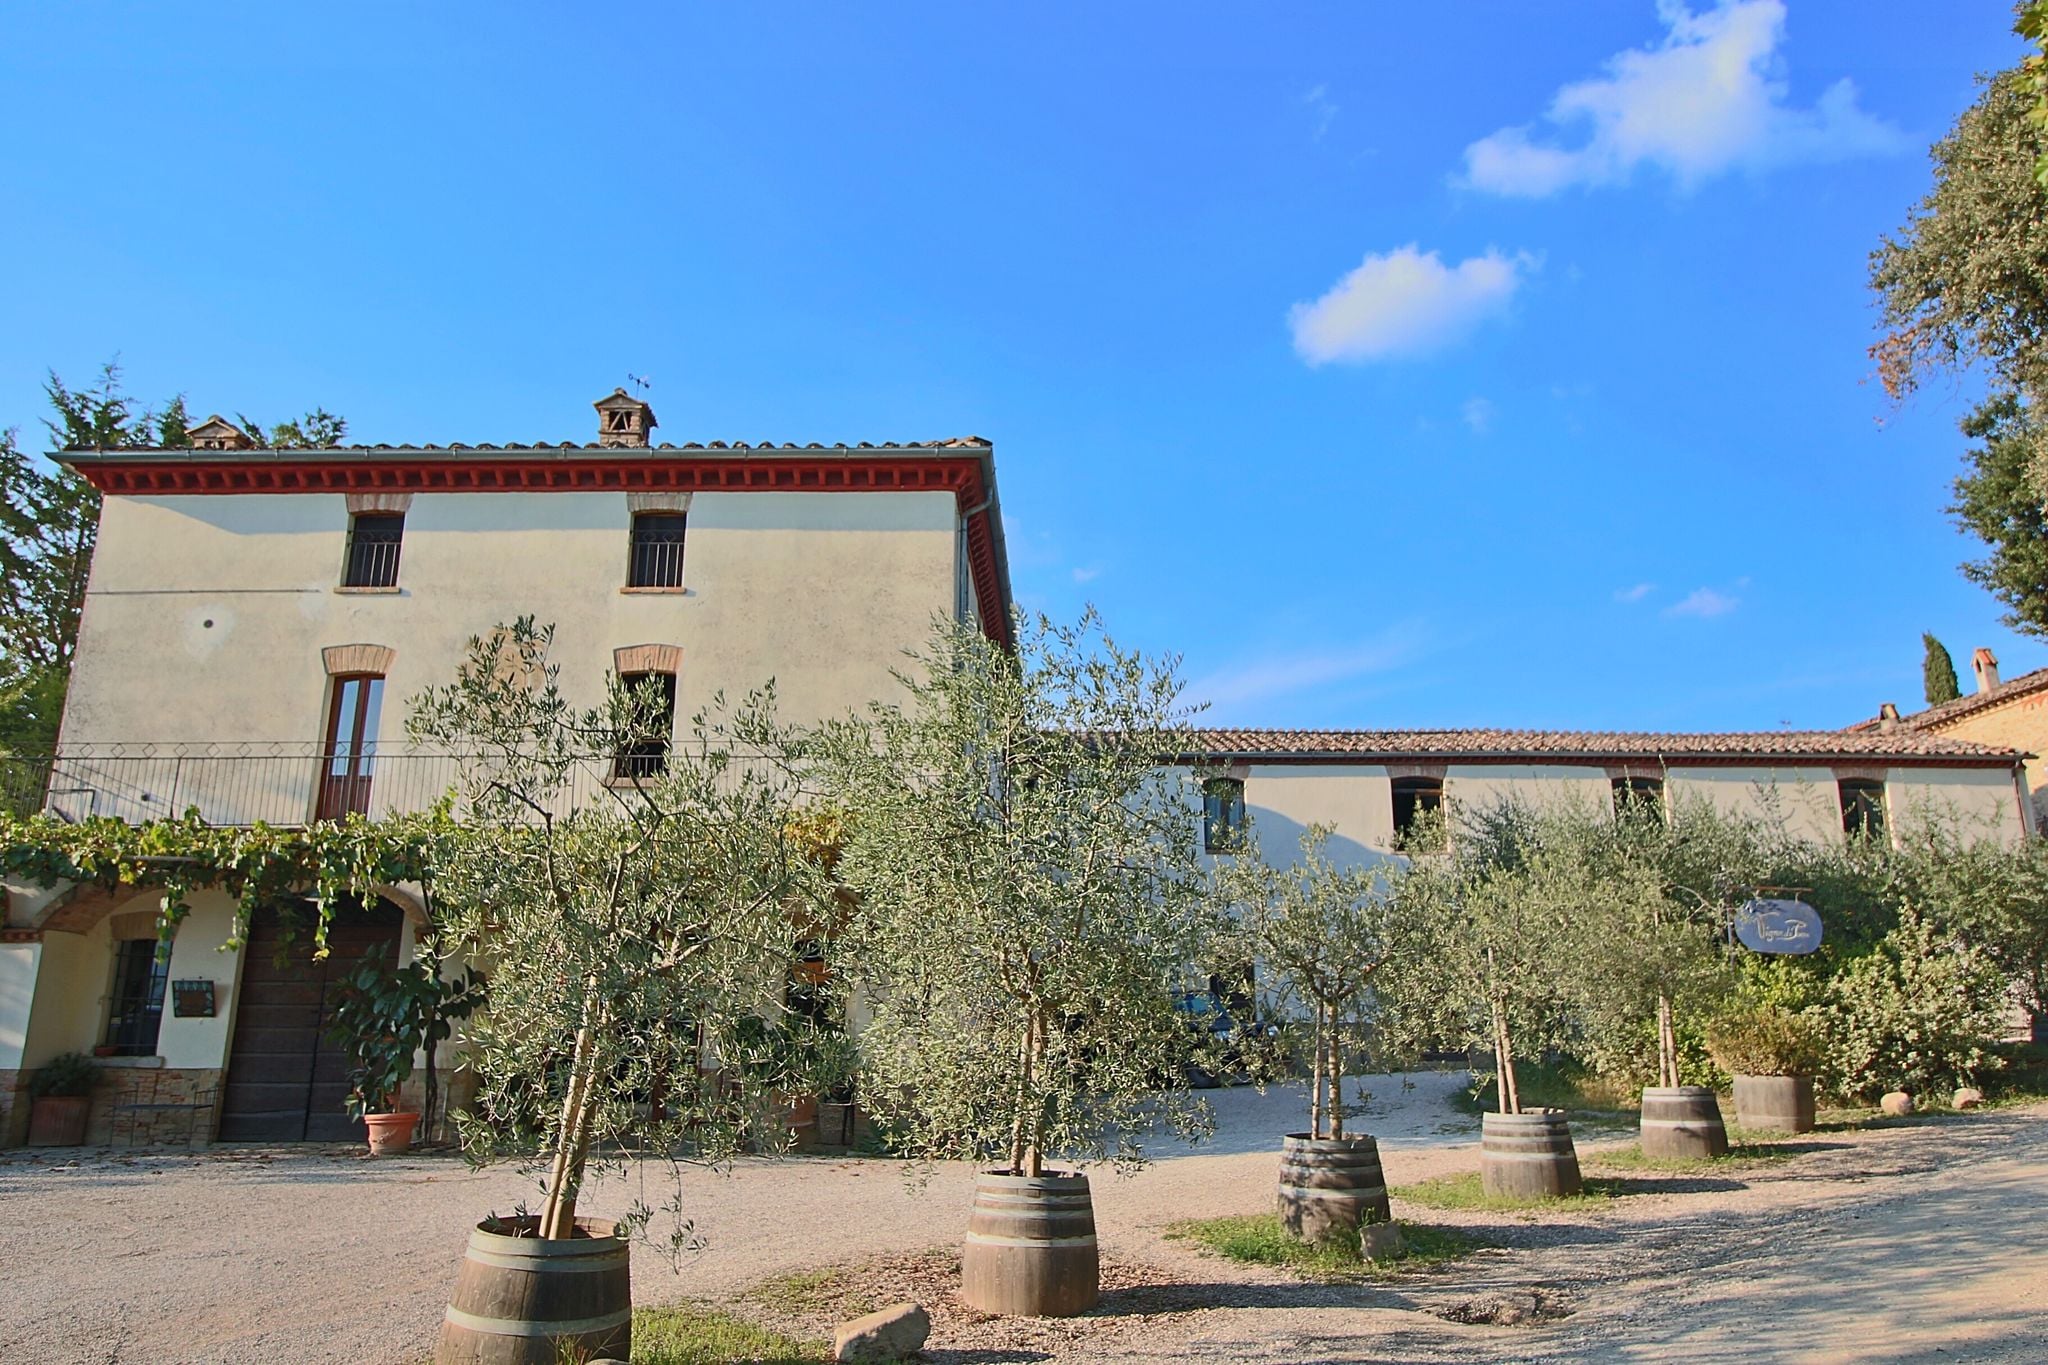 Apartment in an authentic farmhouse, centrally located on a wine estate.